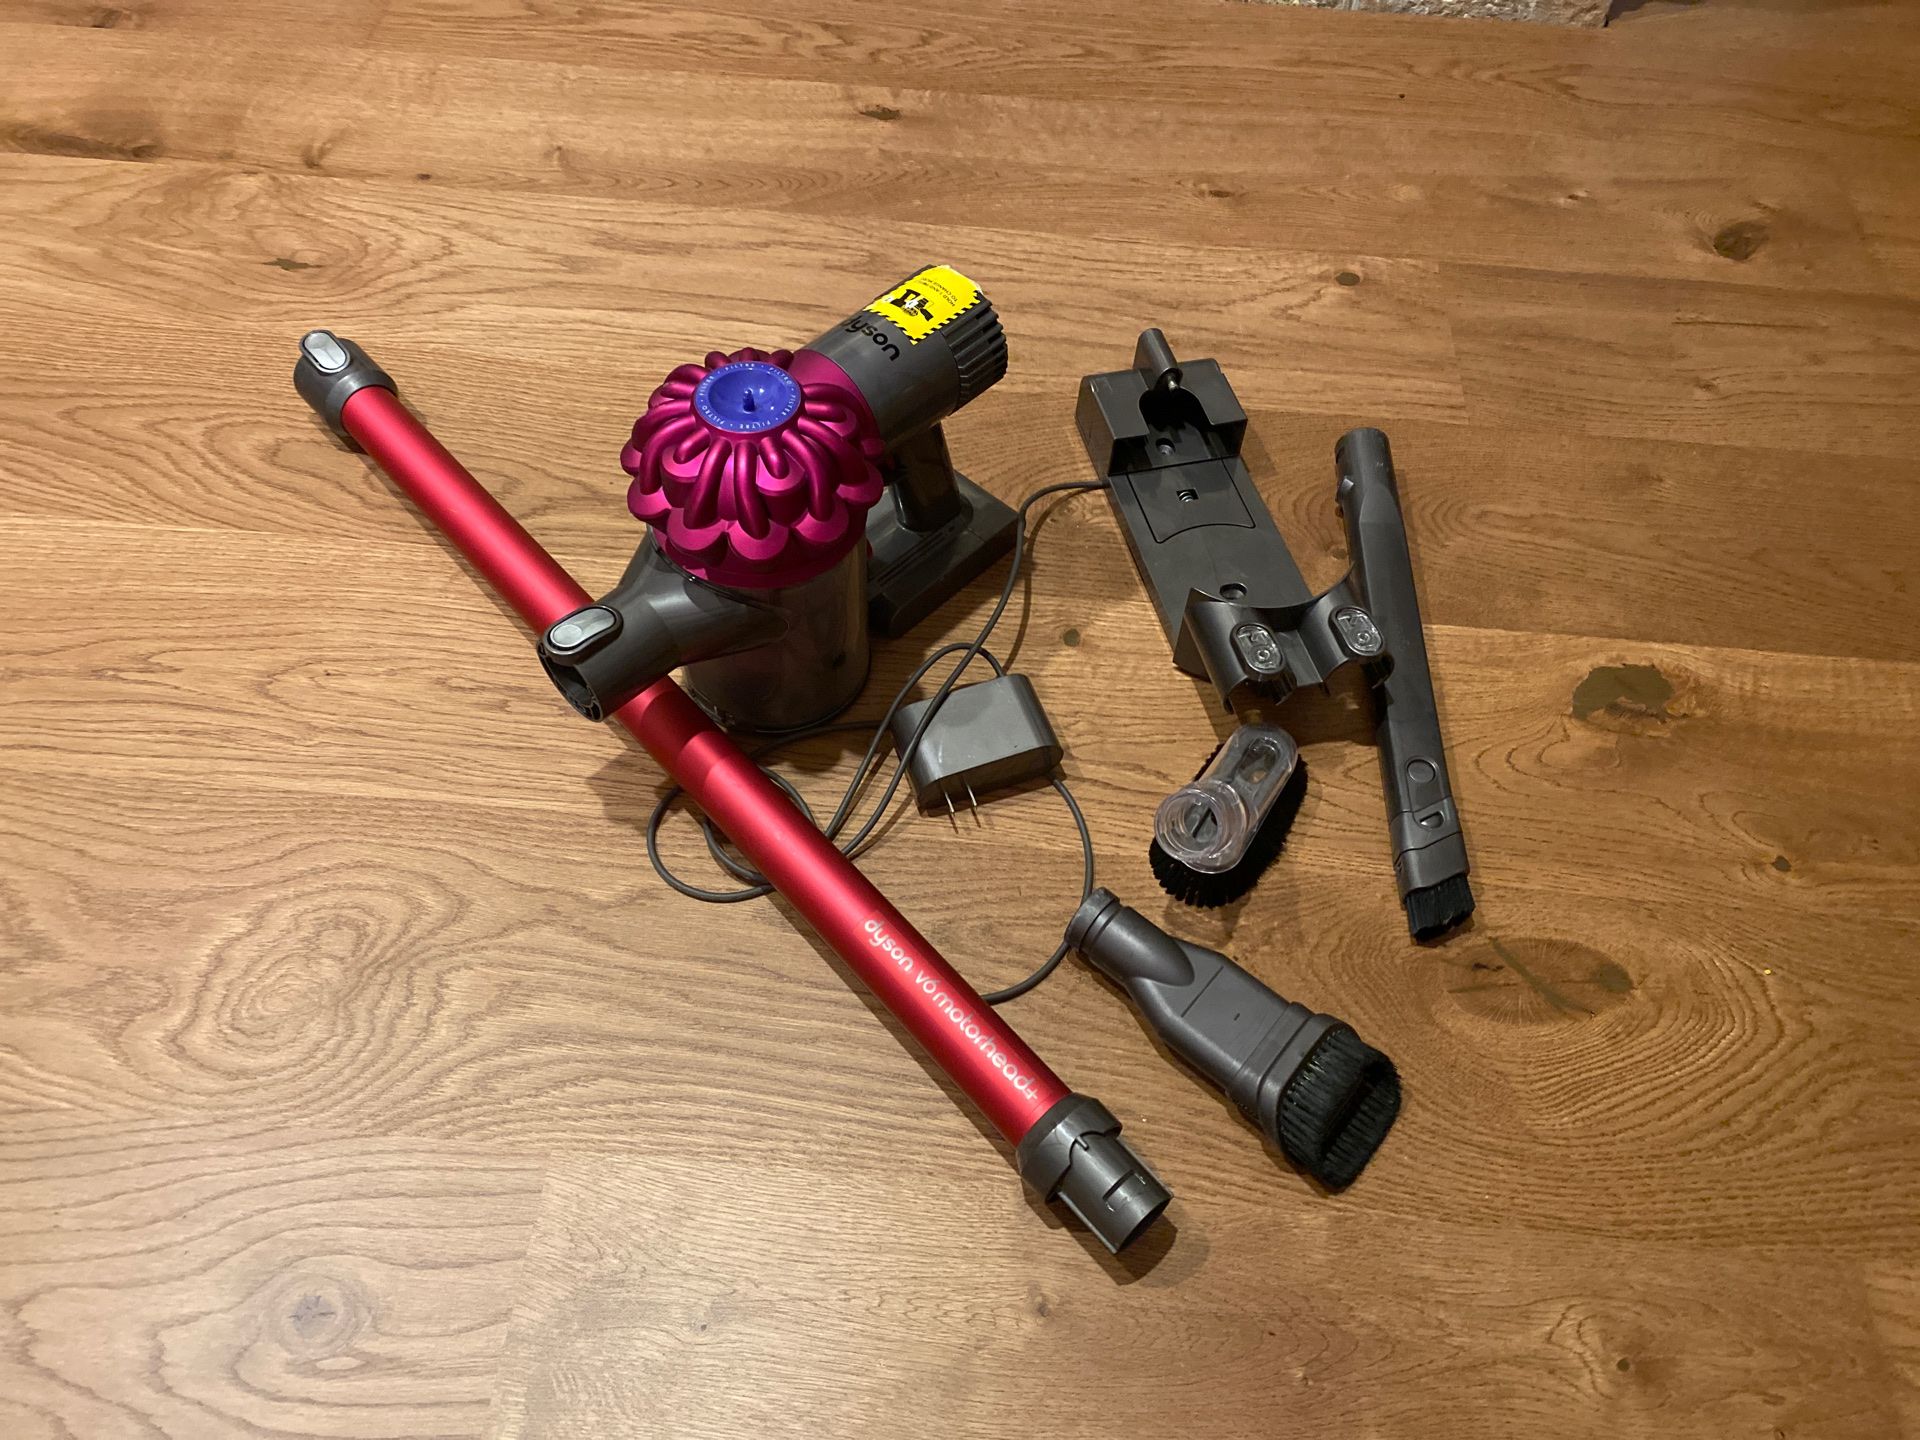 Dyson V6 Motorhead+ Plus Battery powered vacuum with extra accessories and wall mount